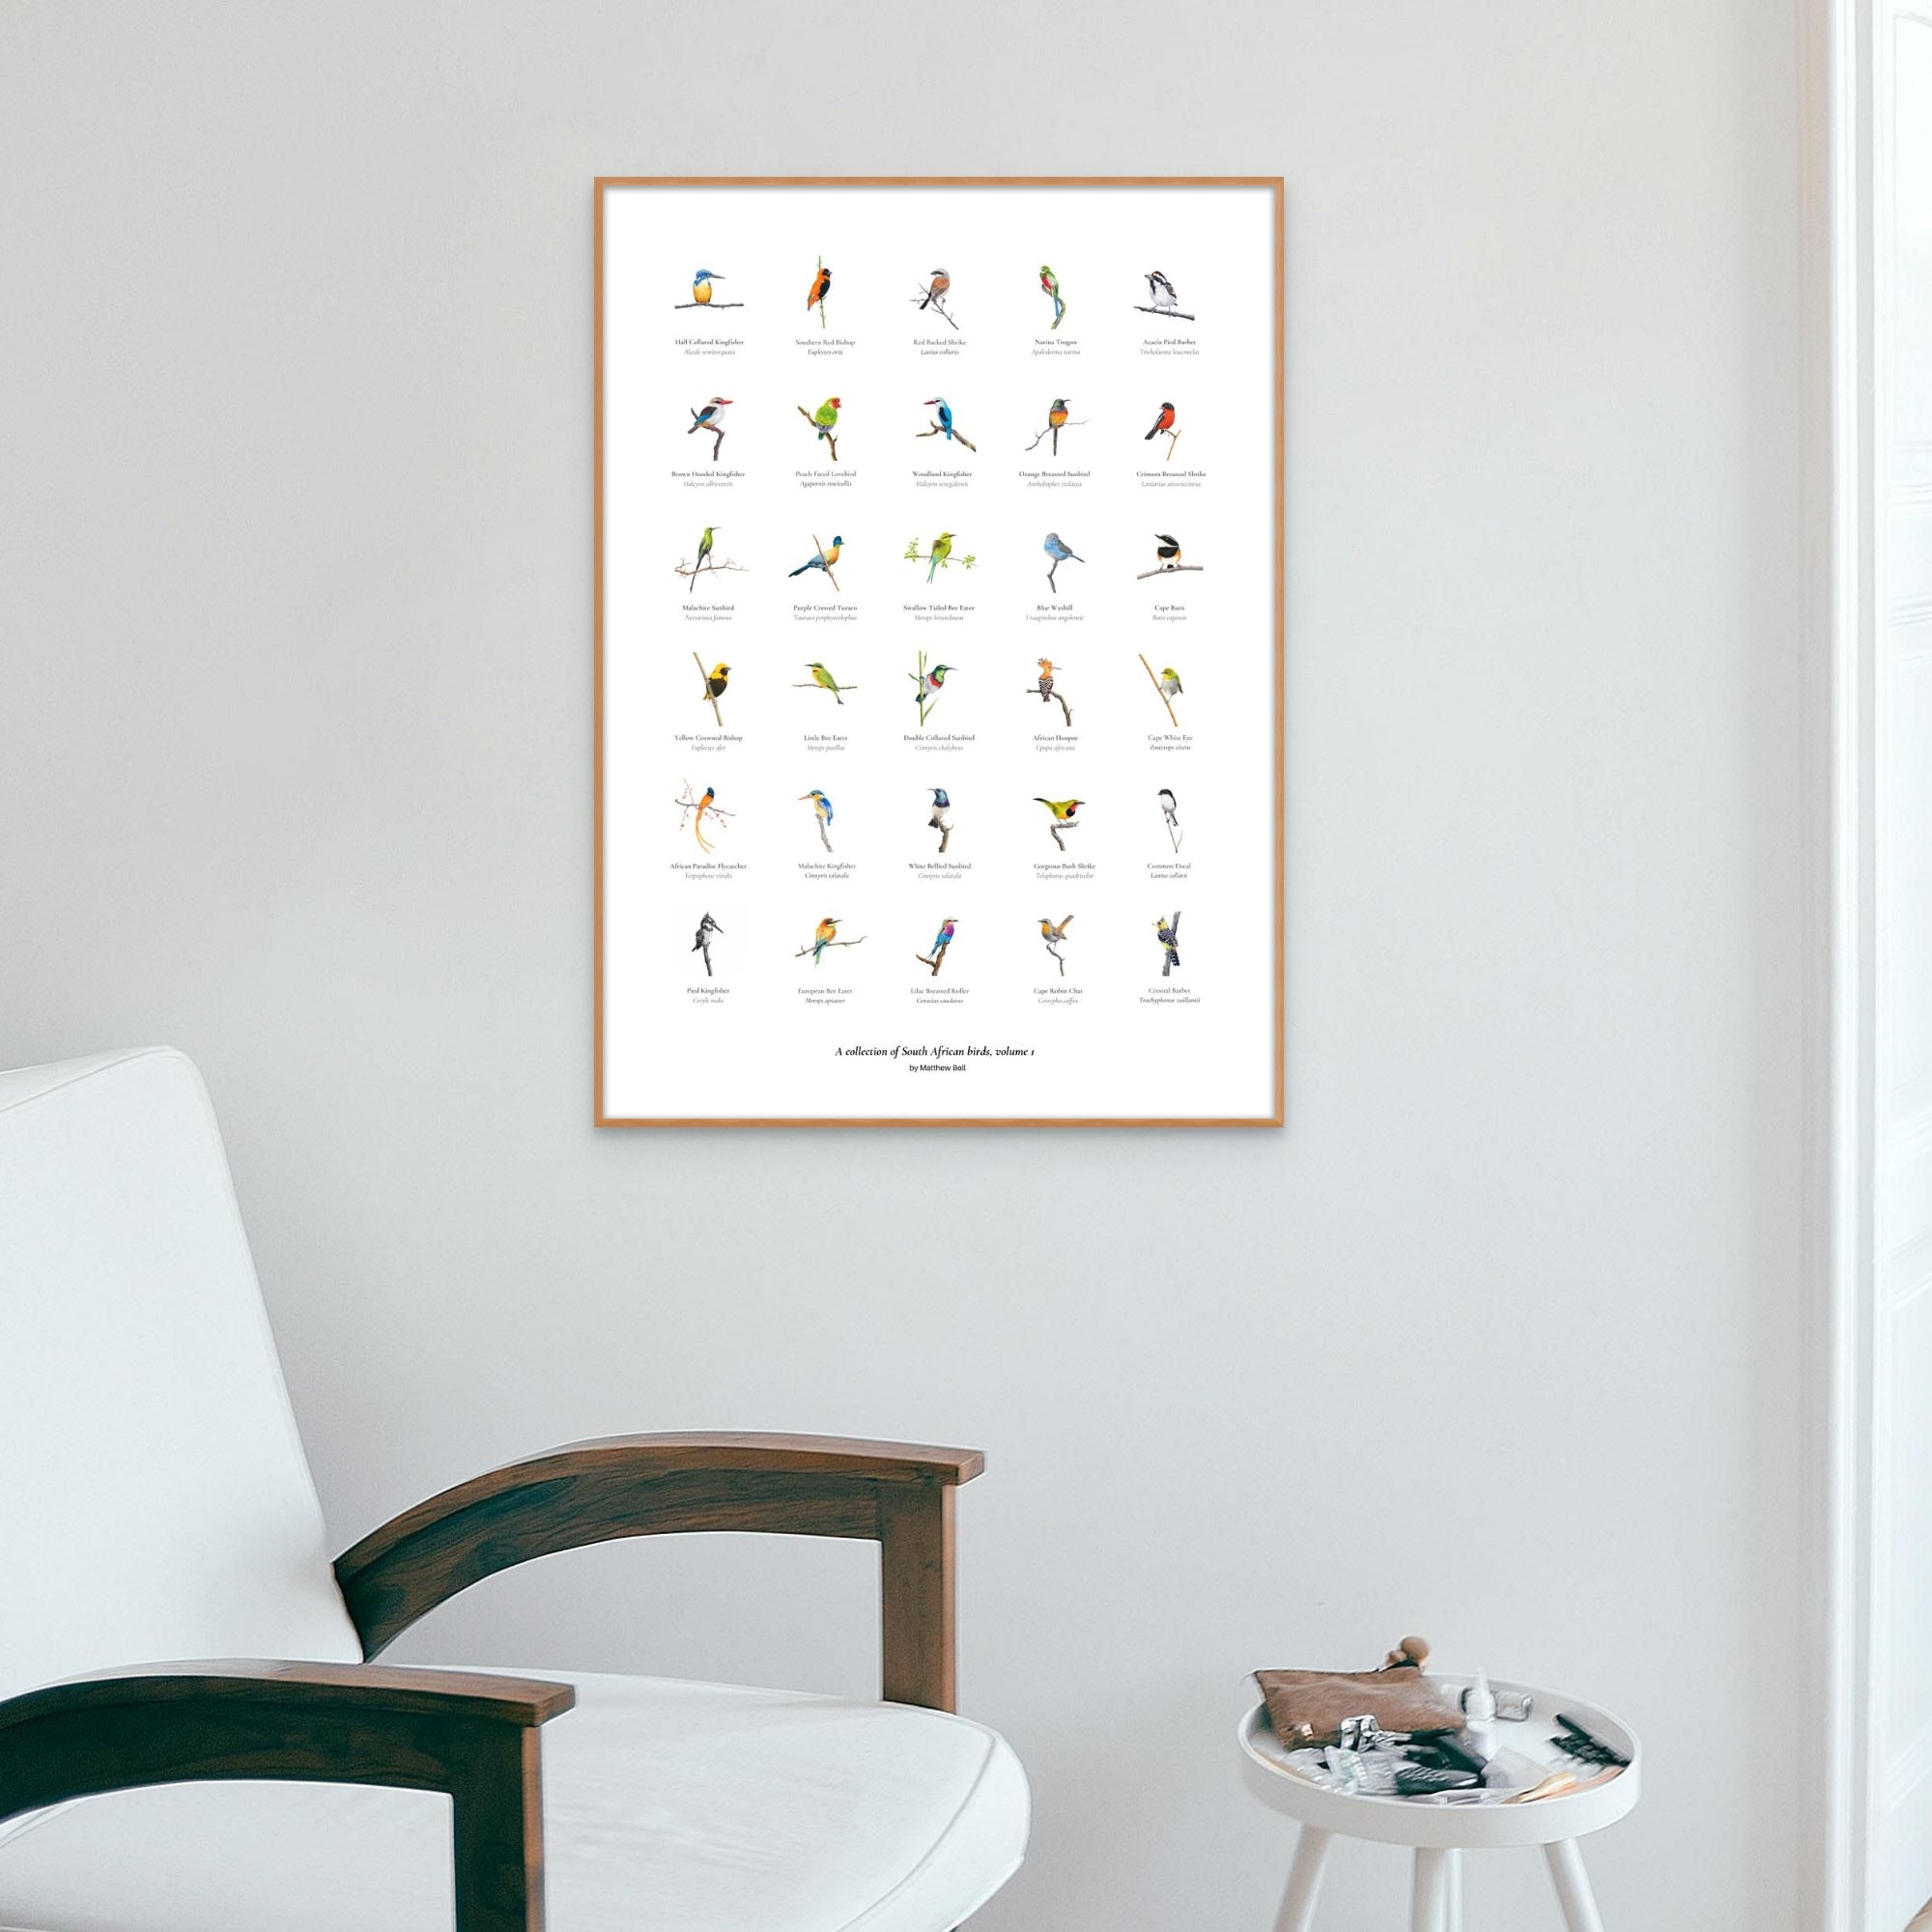 A collection of South African birds poster artwork by wildlife artist Matthew Bell